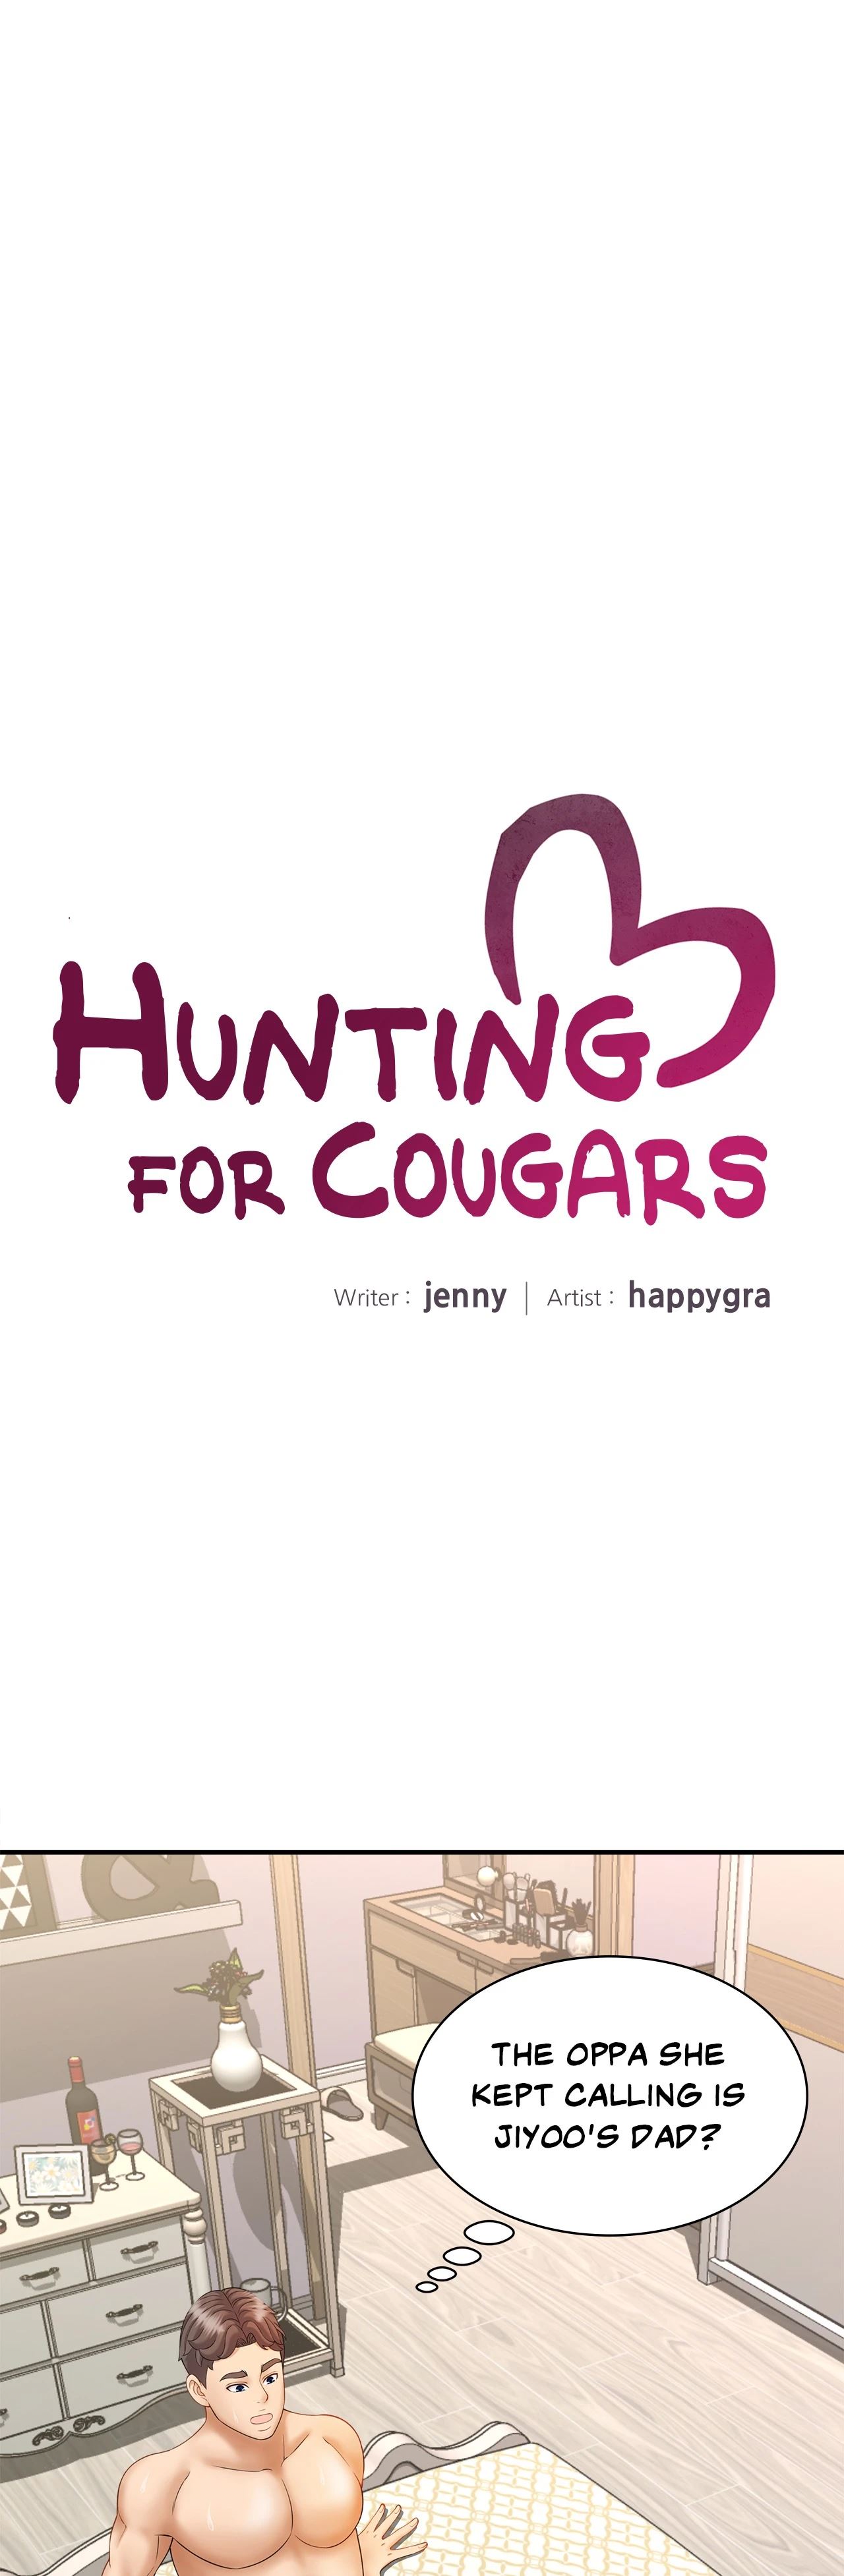 Hunting for Cougars NEW image